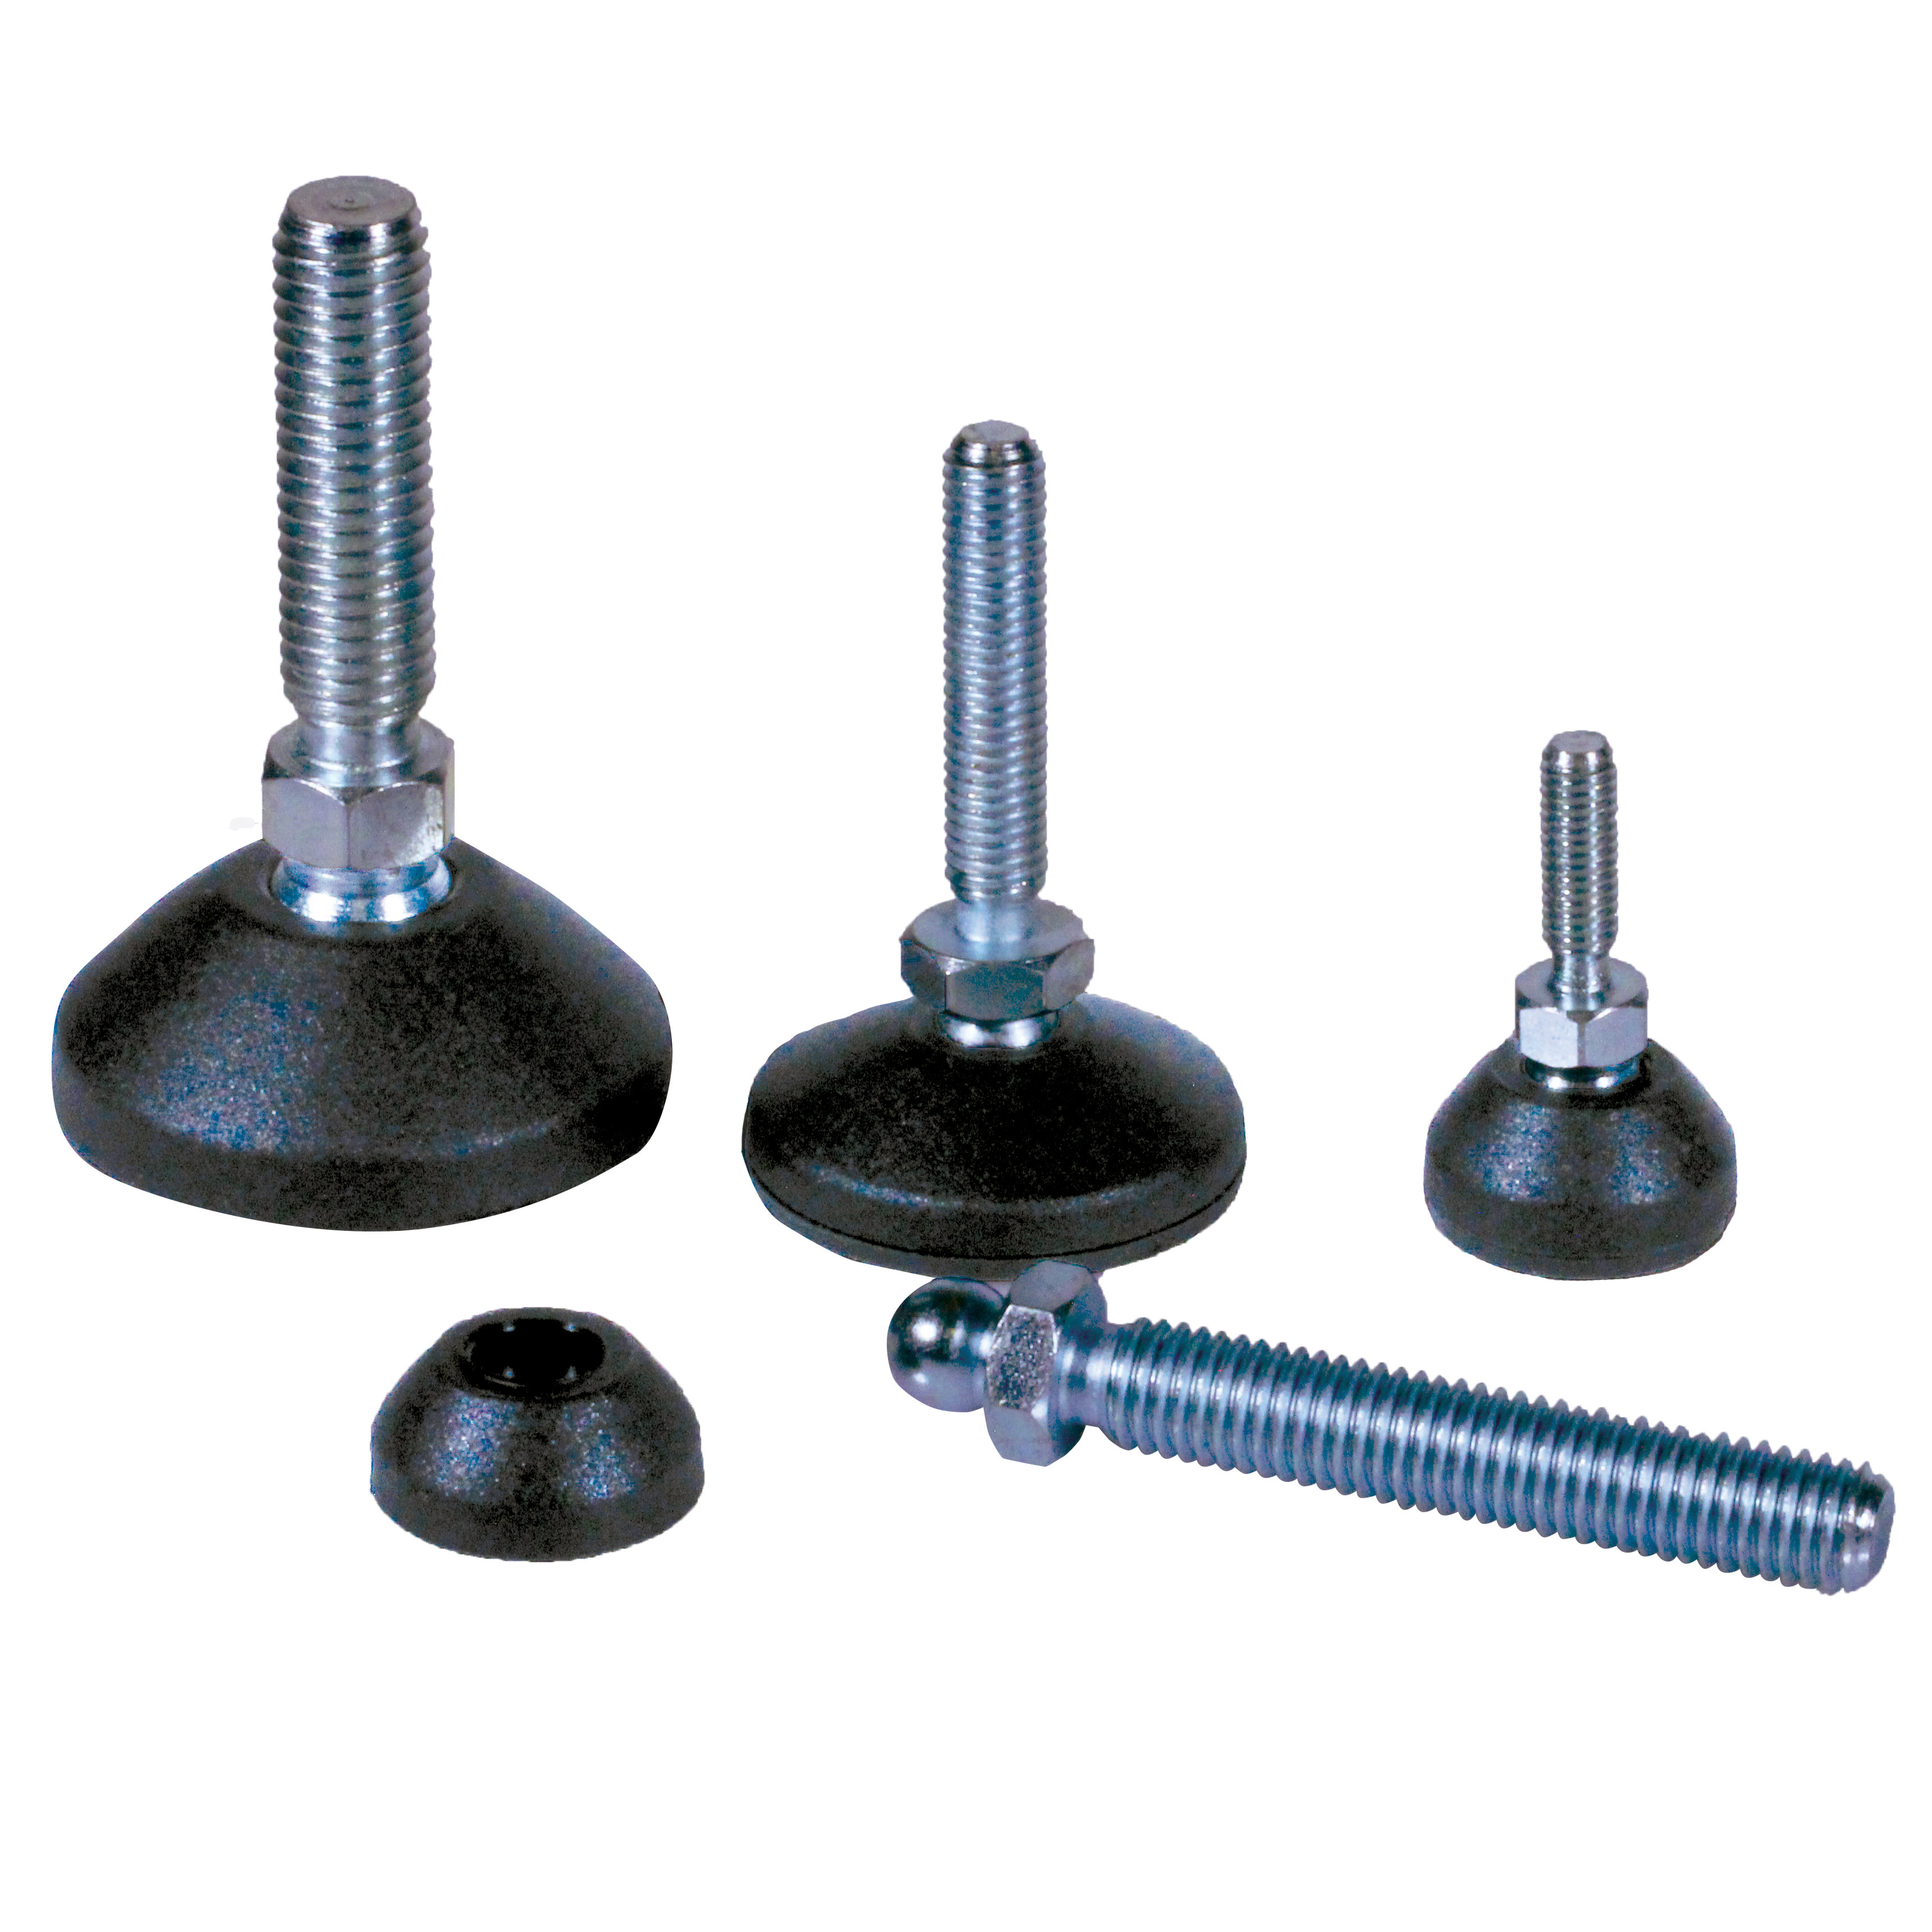 Threaded swivel feet - Swidel feet without anti-slip plate - Up to 770N - +/-10°